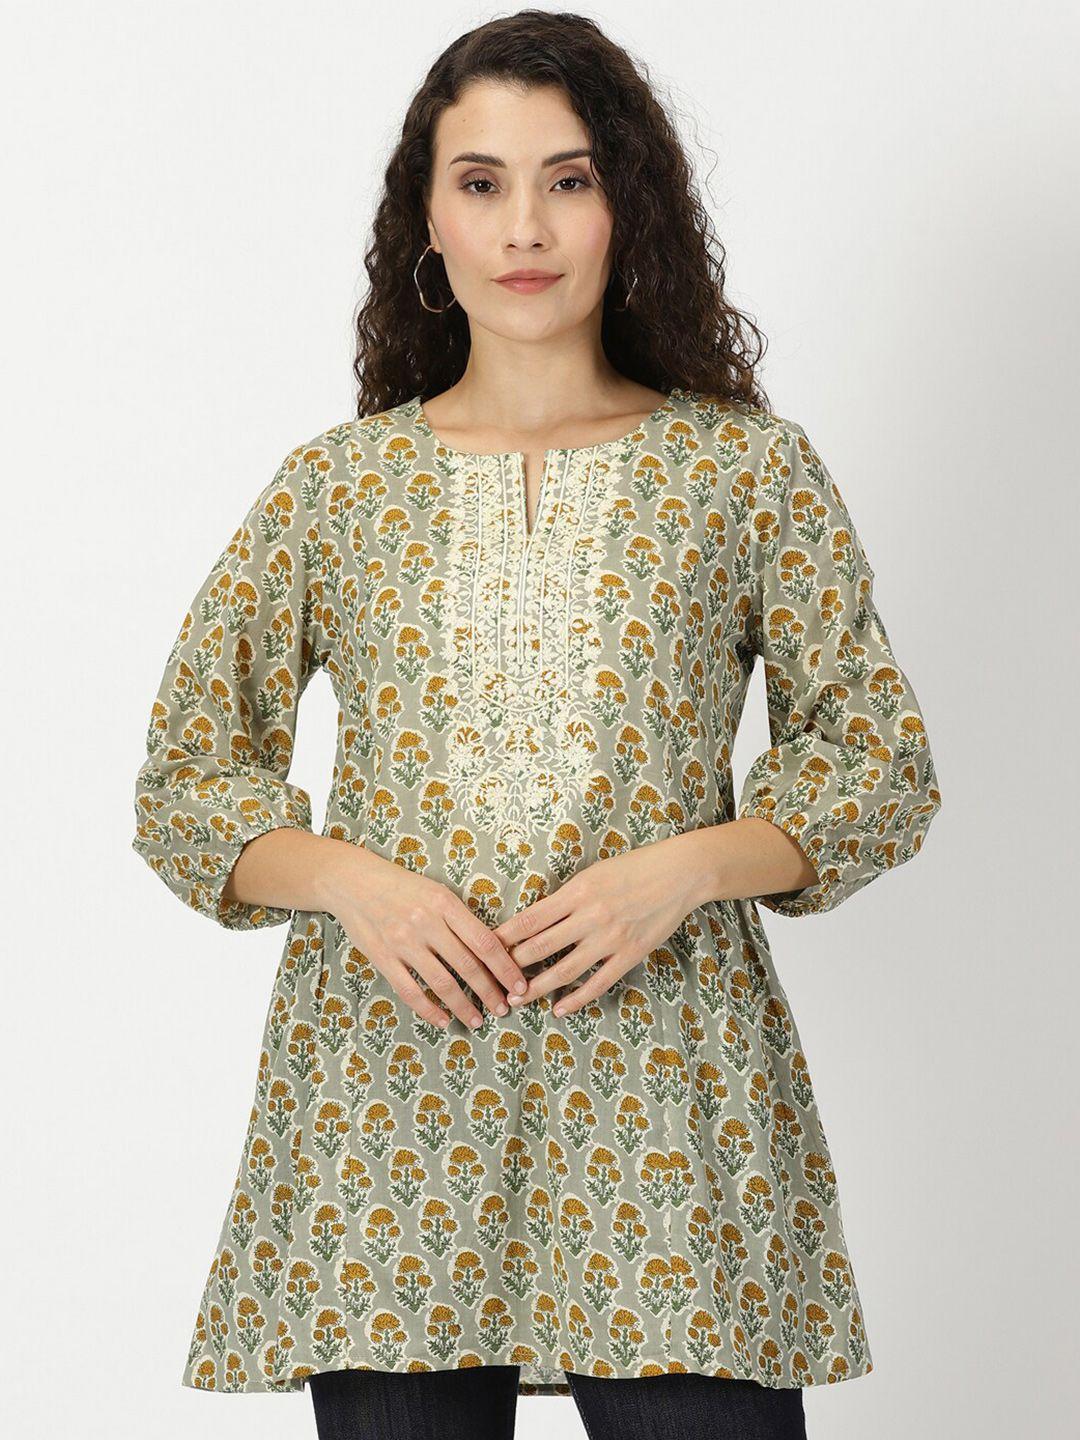 saffron threads pure cotton floral print a-line kurti tunic with embroidered yoke